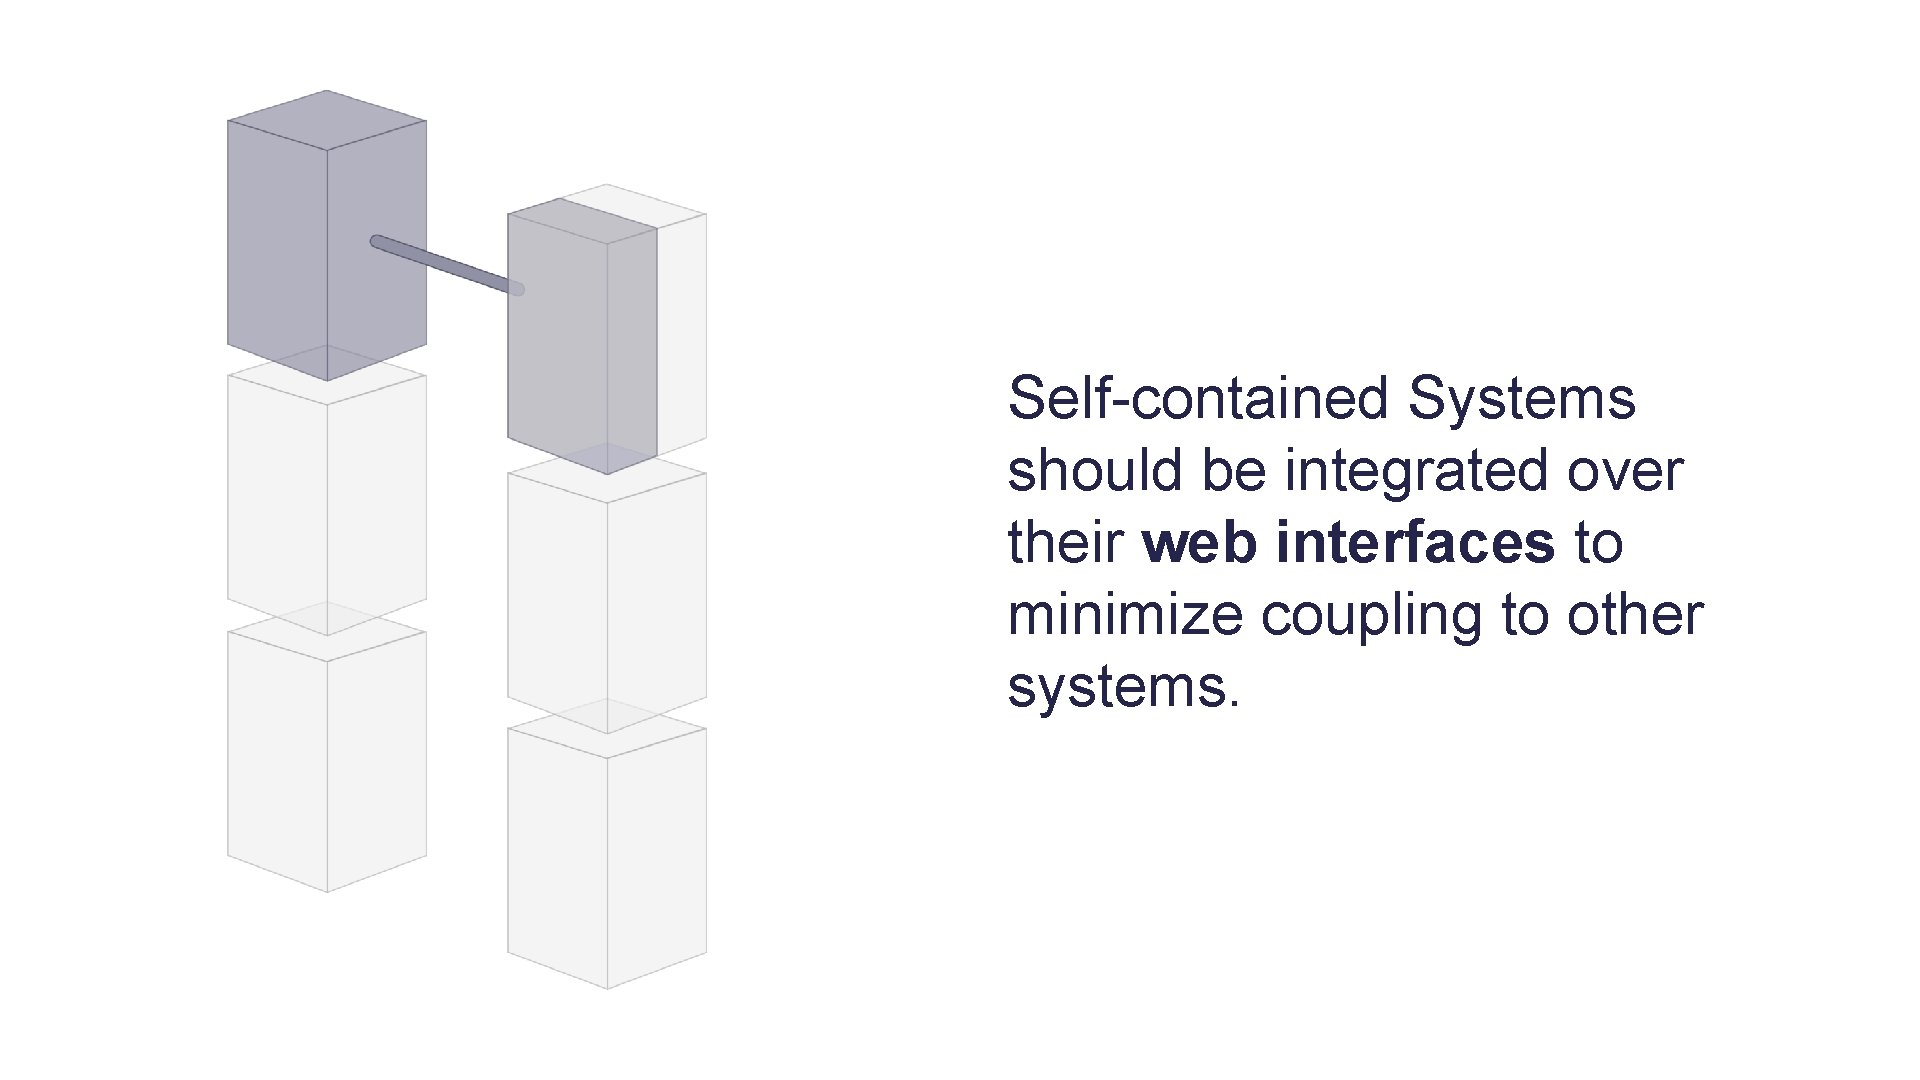 Self-contained Systems should be integrated over their web interfaces to minimize coupling to other